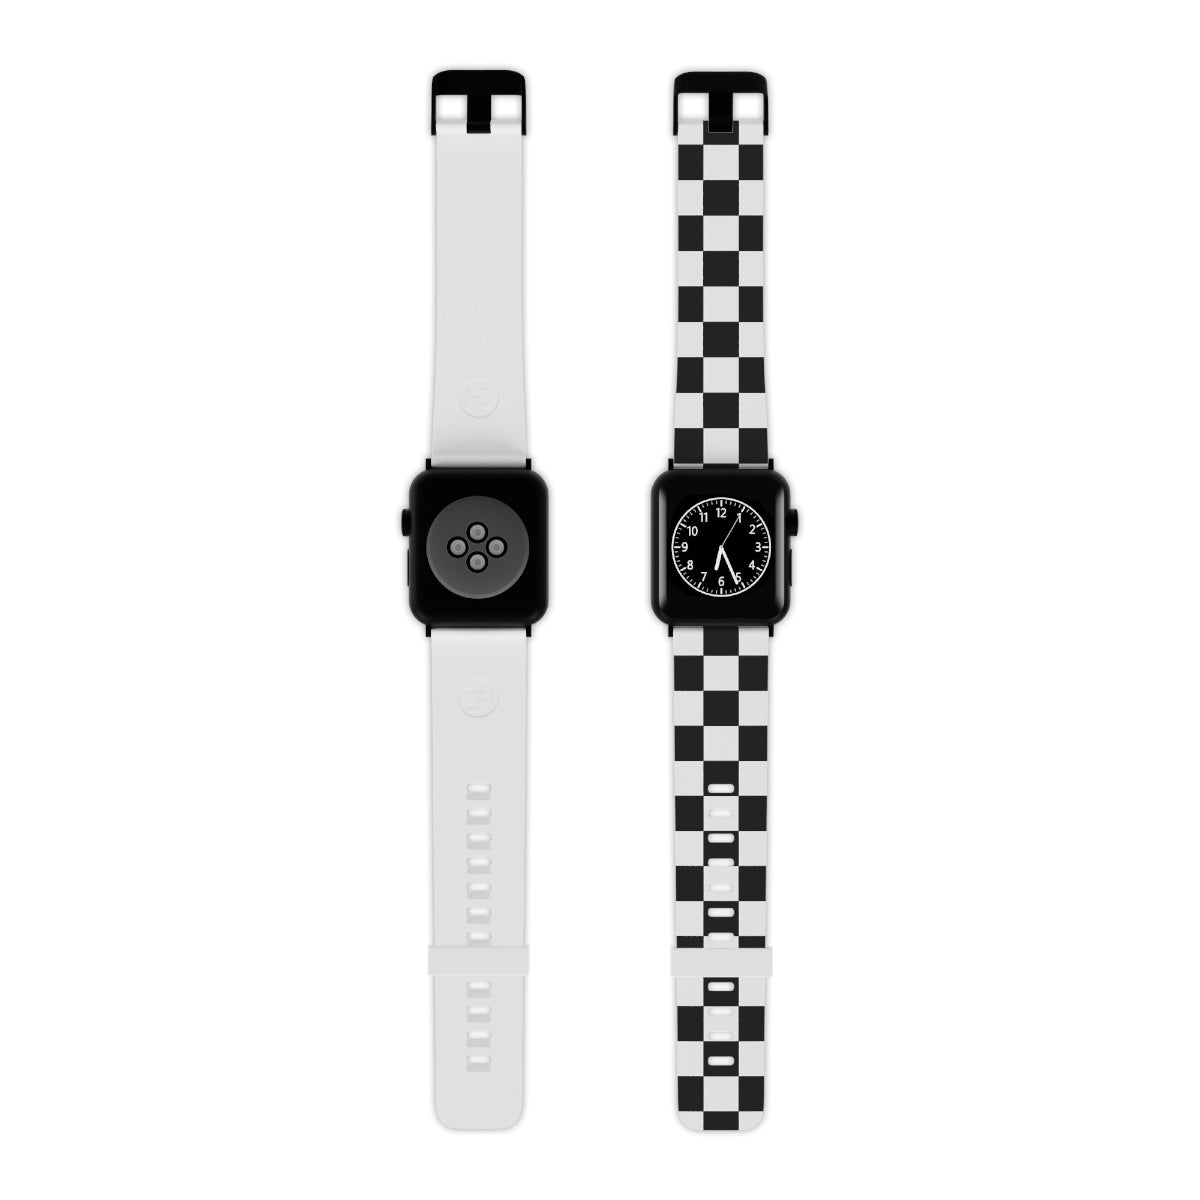 Checkered Apple Watch Band, Black White Check Designer Waterproof Sports Athletic 38mm 40mm 42mm 44mm Size Series 3 4 5 6 7 SE Strap Starcove Fashion